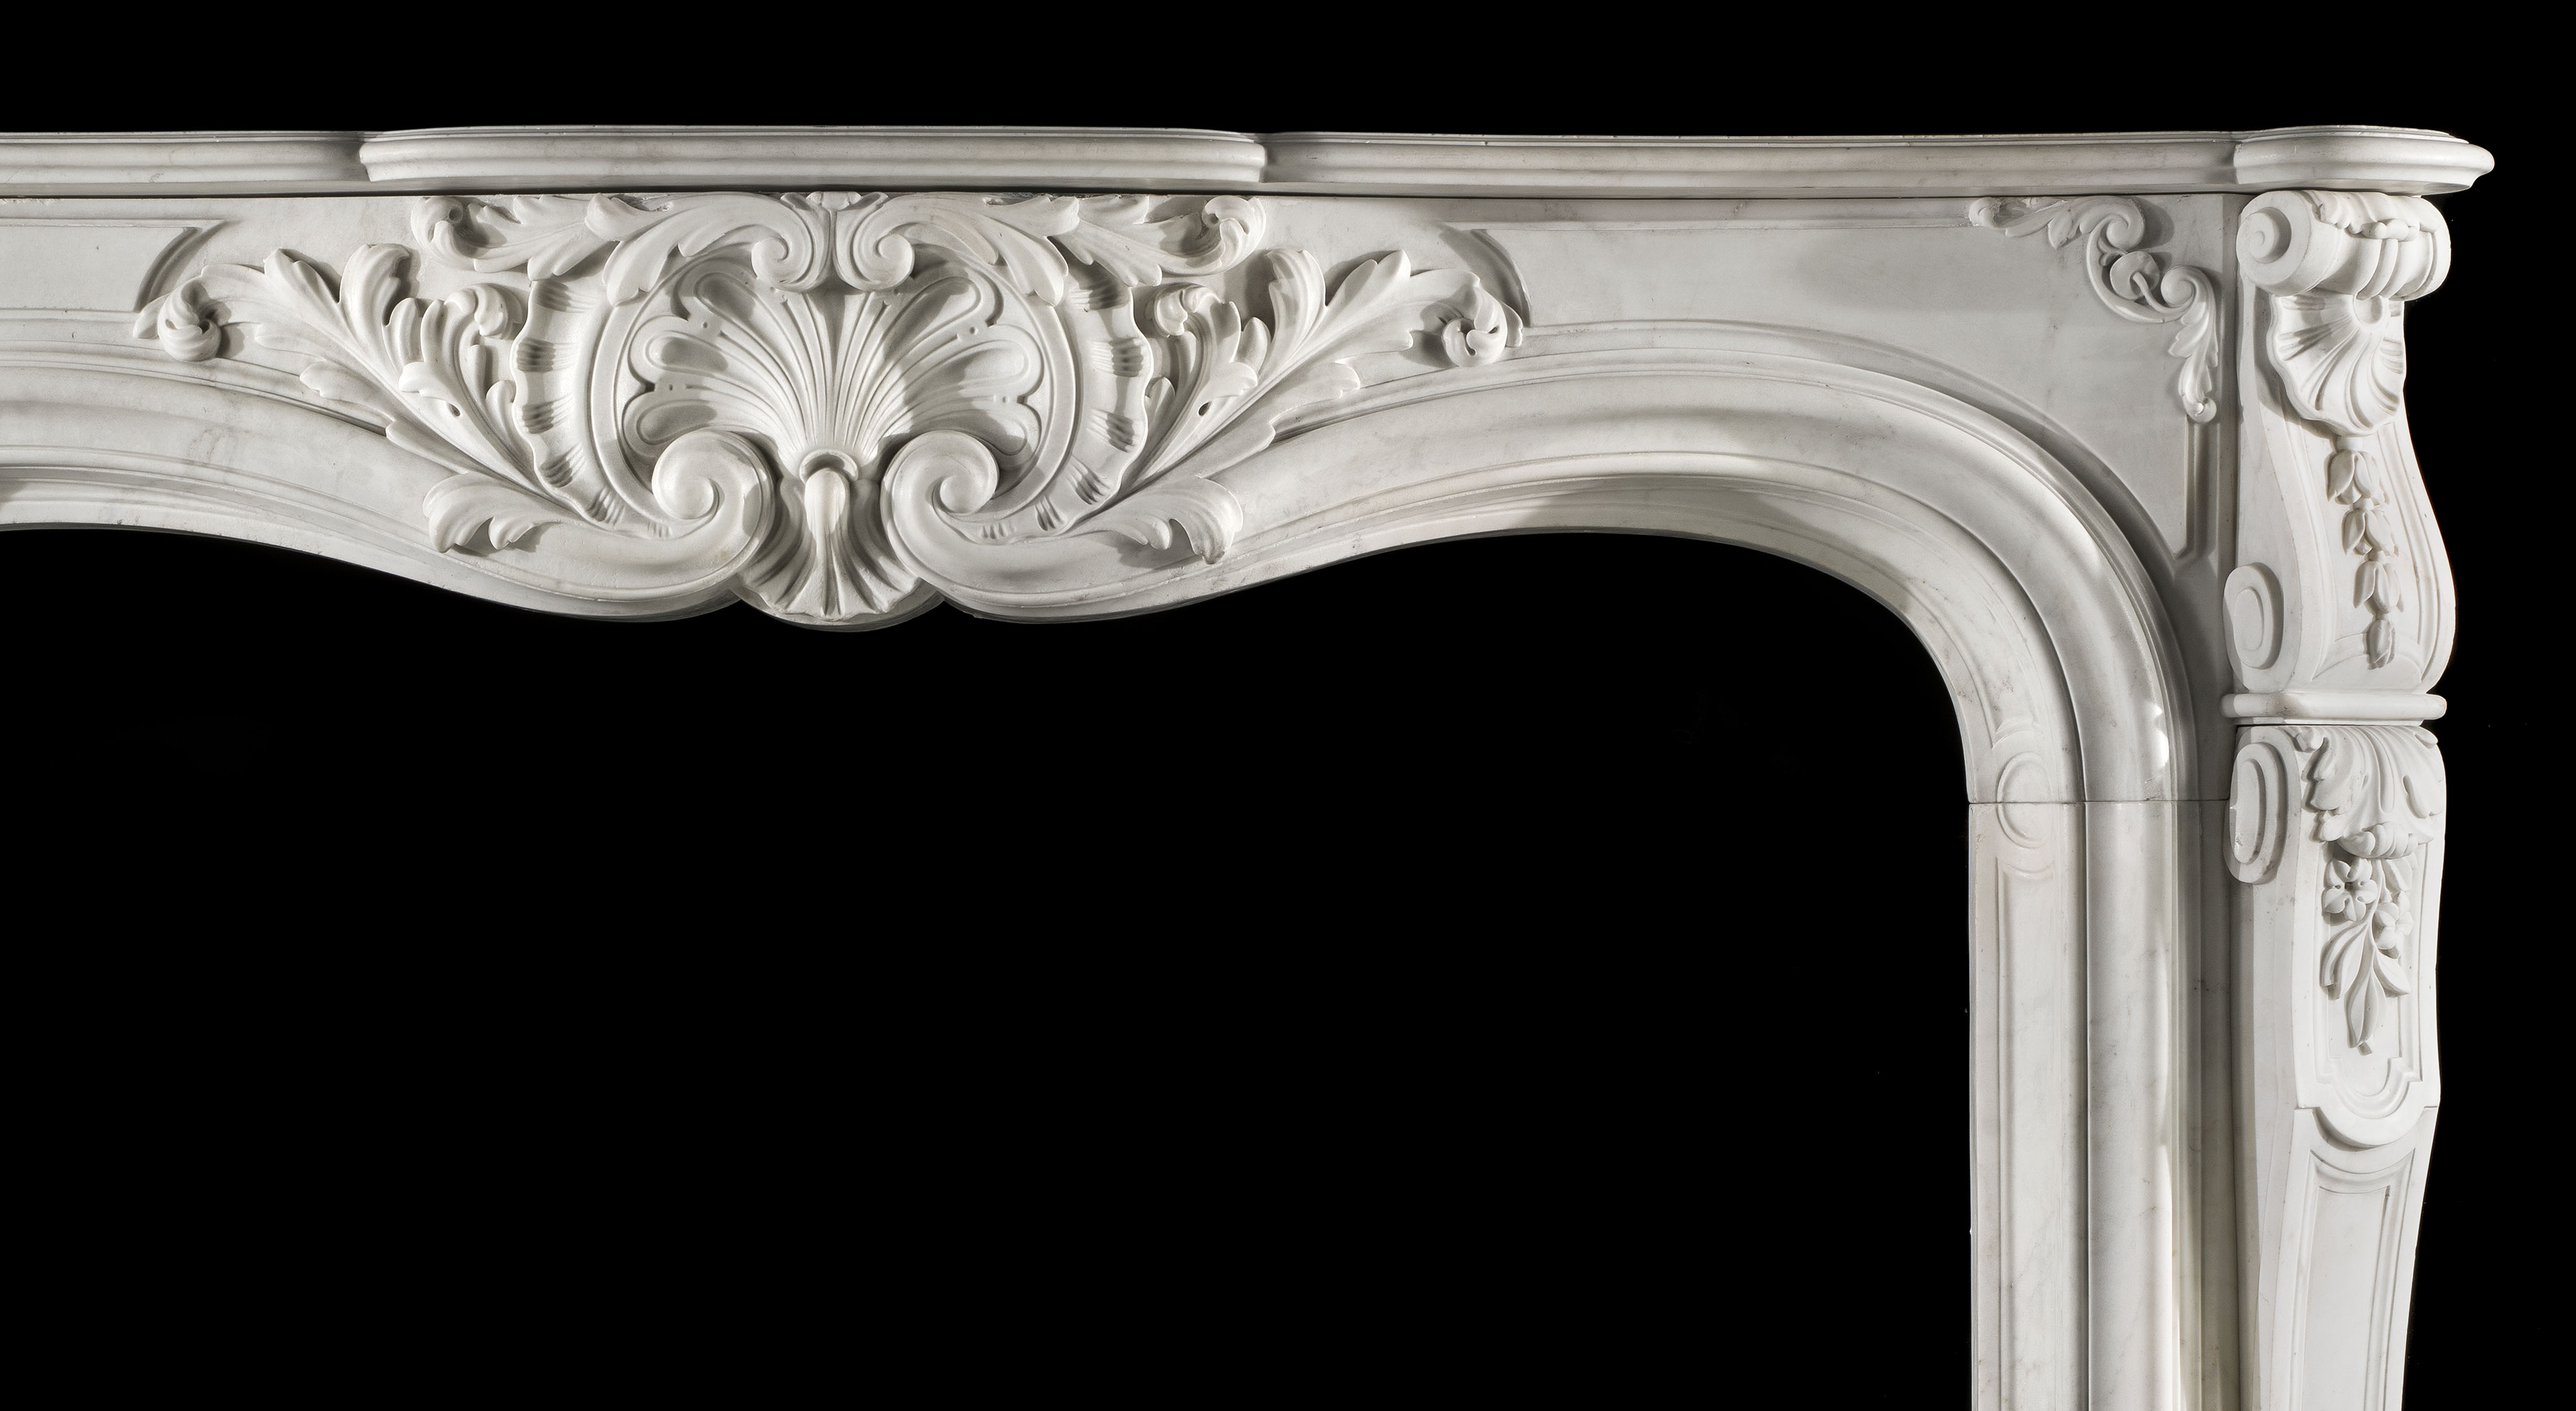 A French Rococo antique marble chimneypiece mantel